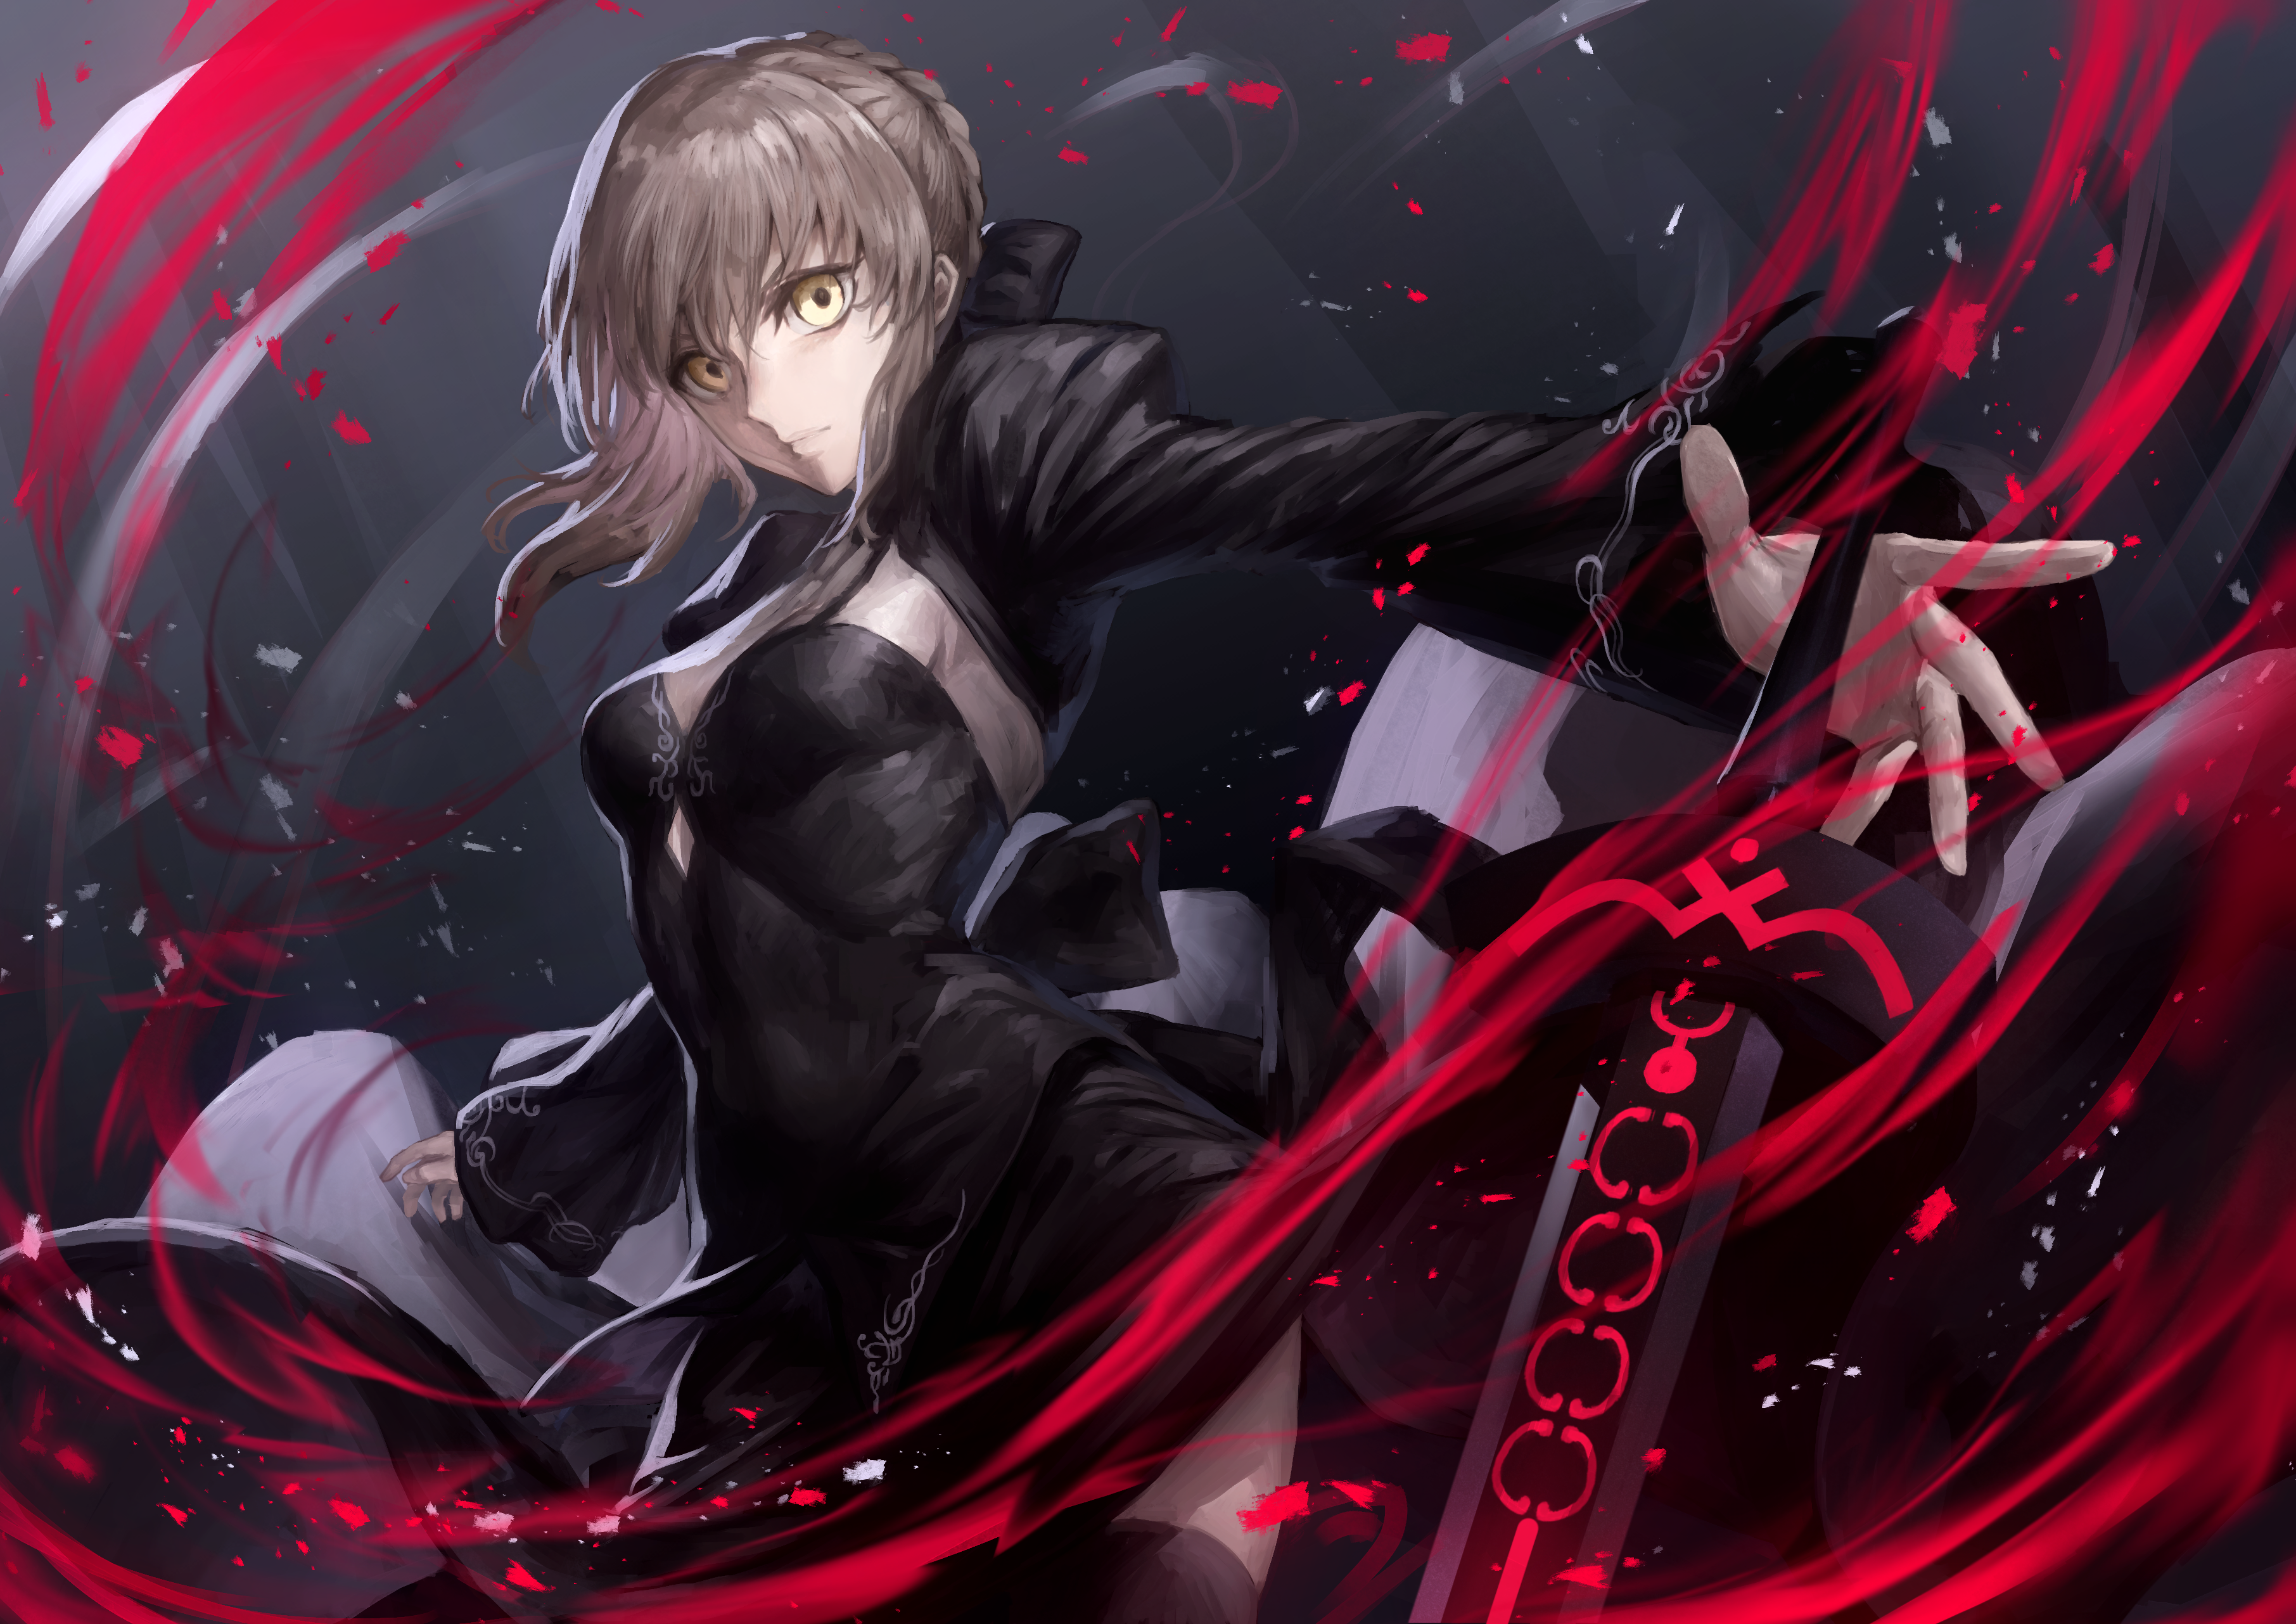 Saber Alter by ペペロン